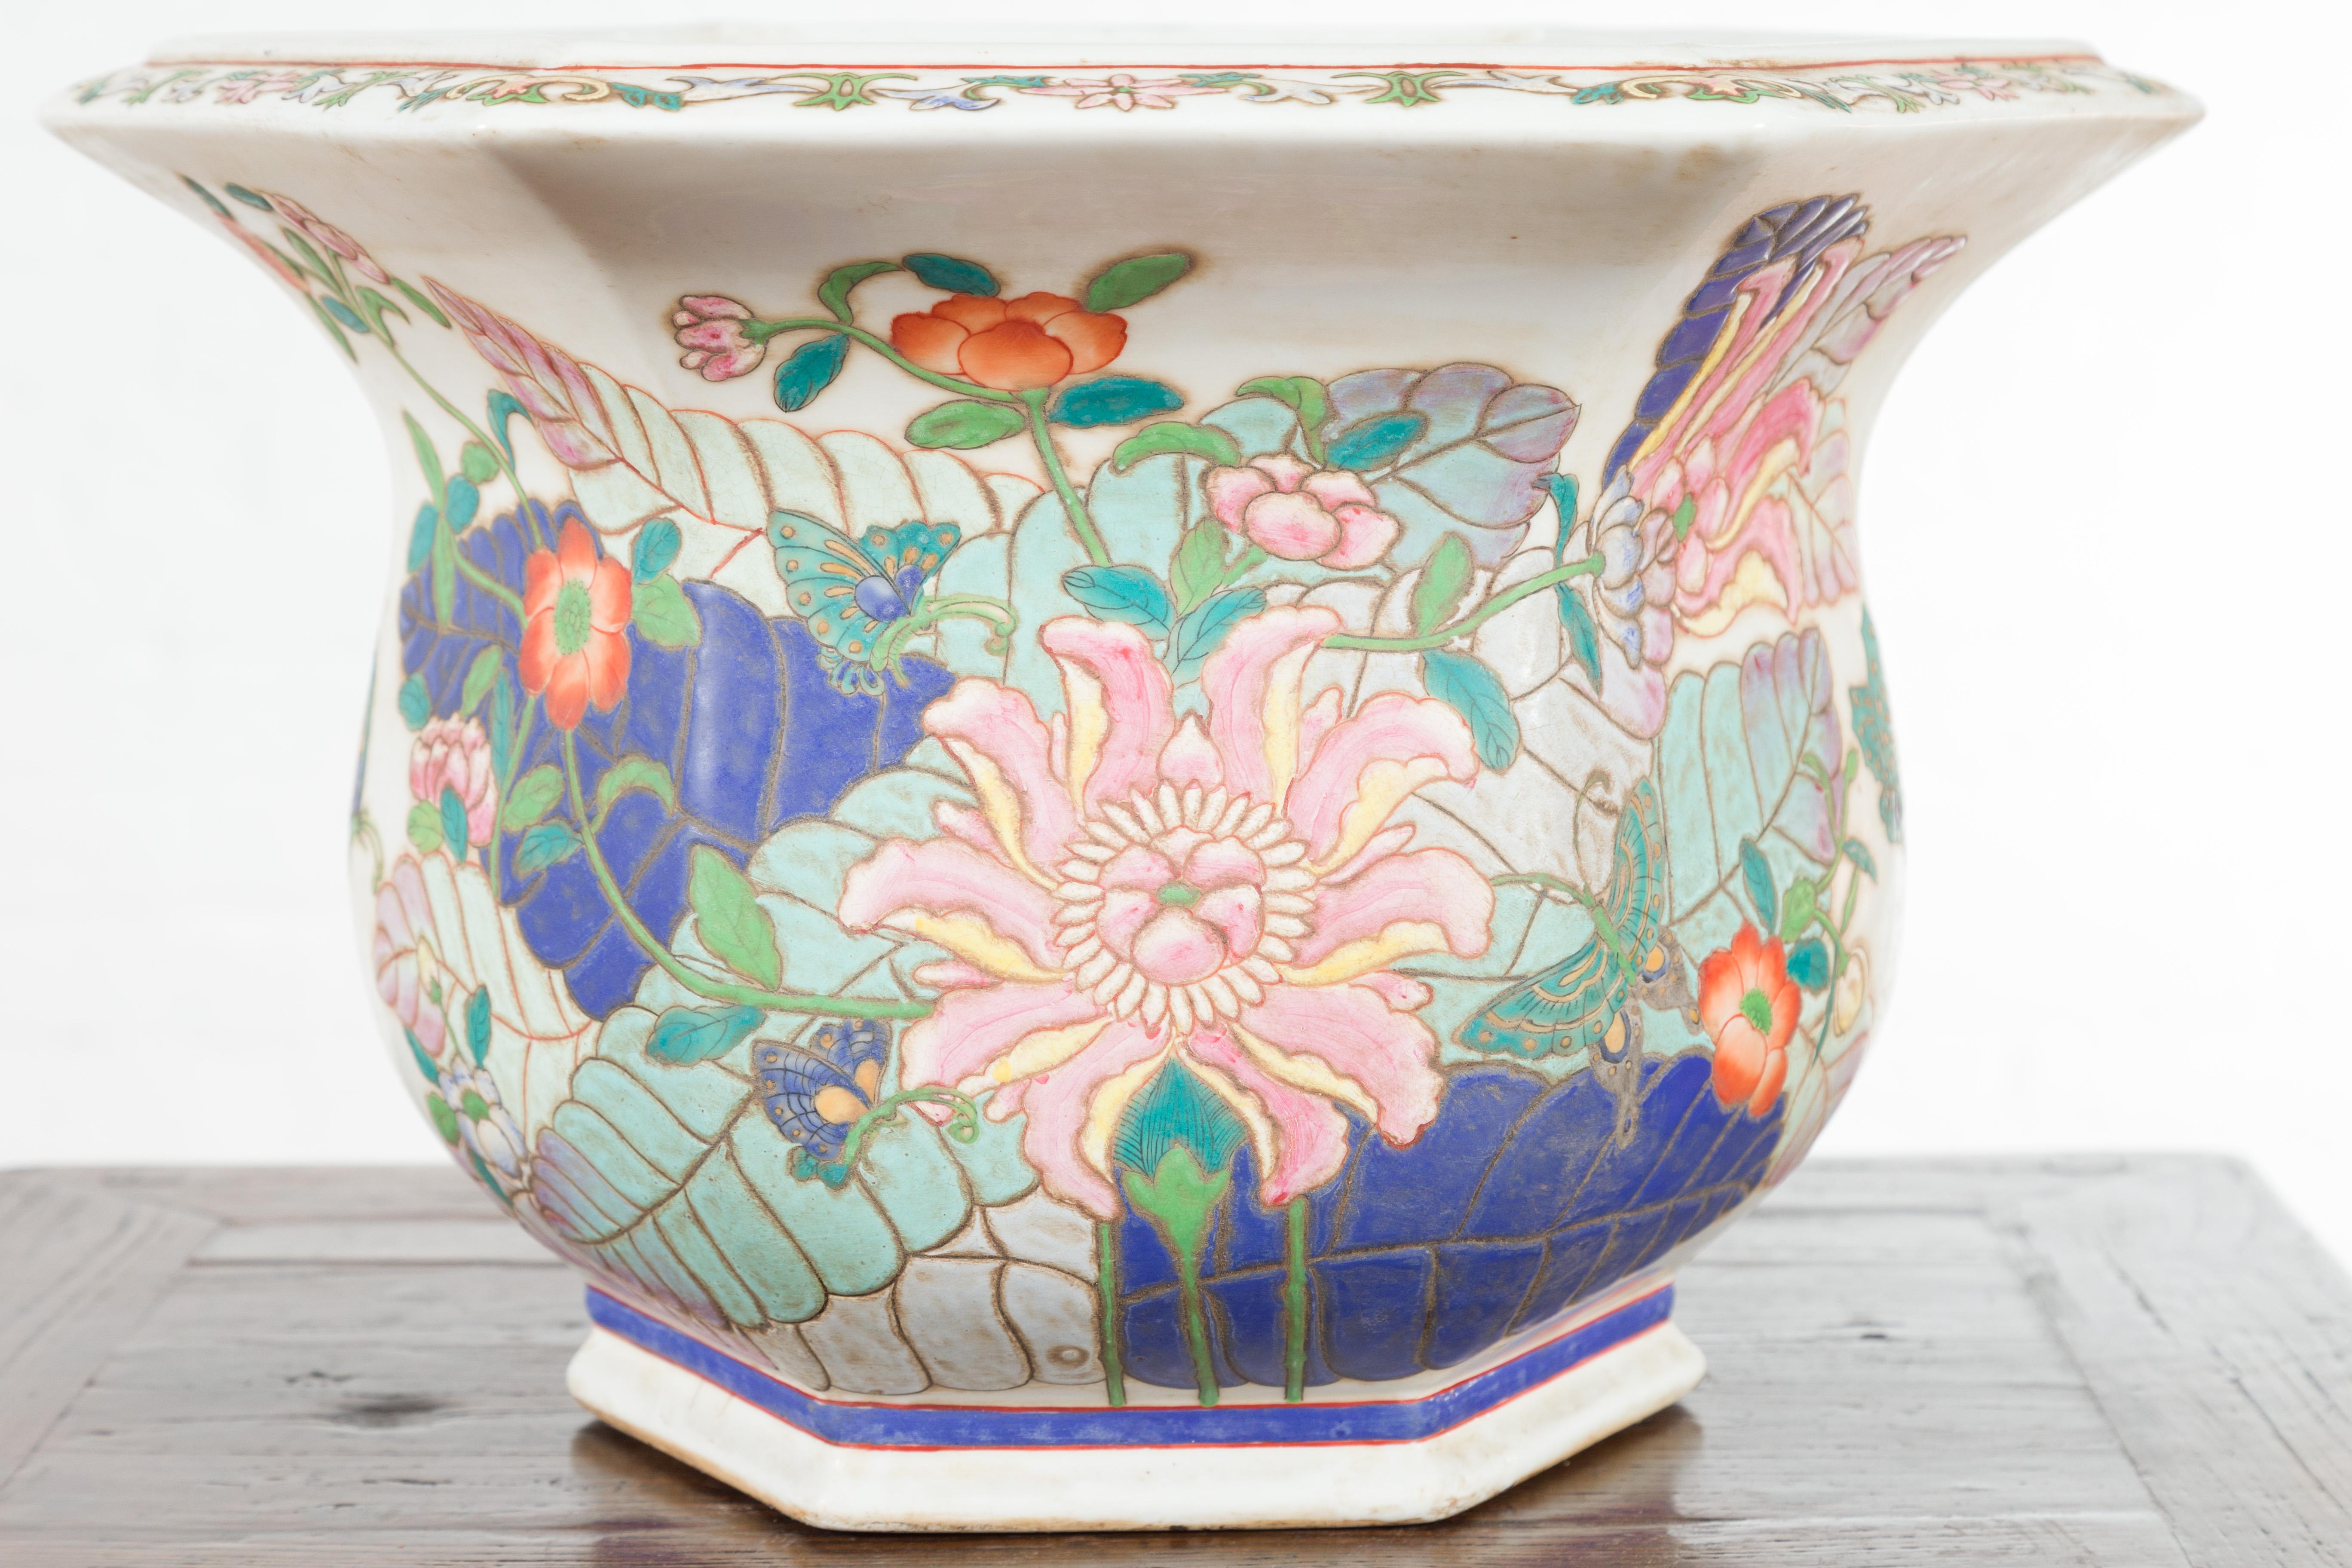 Chinese Vintage Hexagonal Planter with Pastel Foliage, Flowers and Butterflies For Sale 1